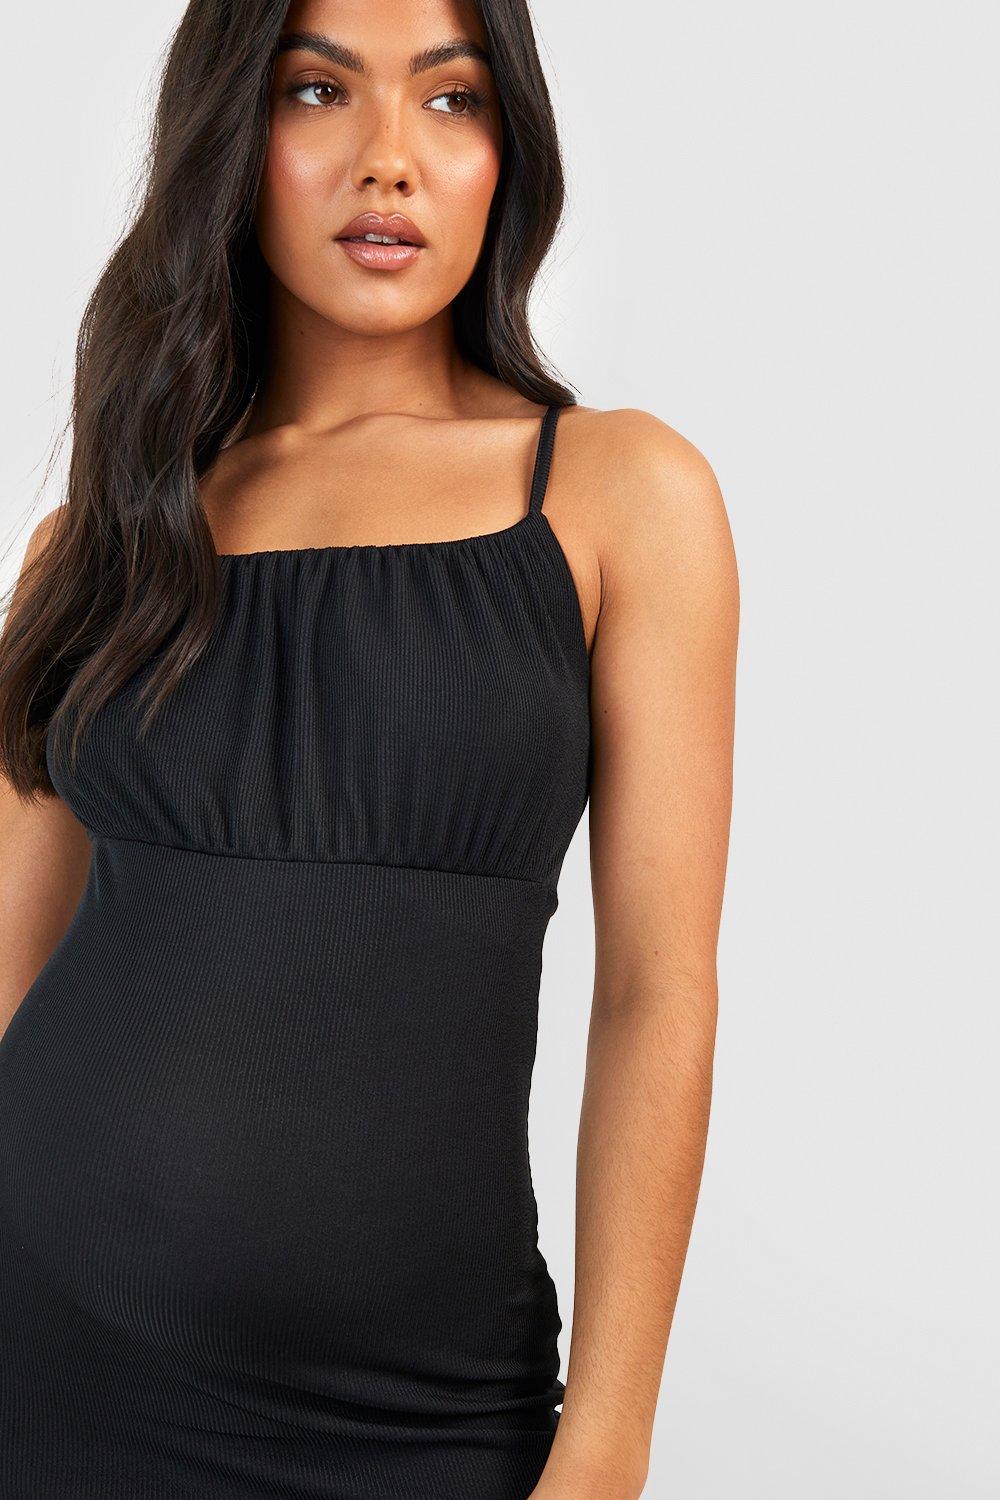 Boohoo Maternity Textured Ruched Seam Maxi Dress in Black